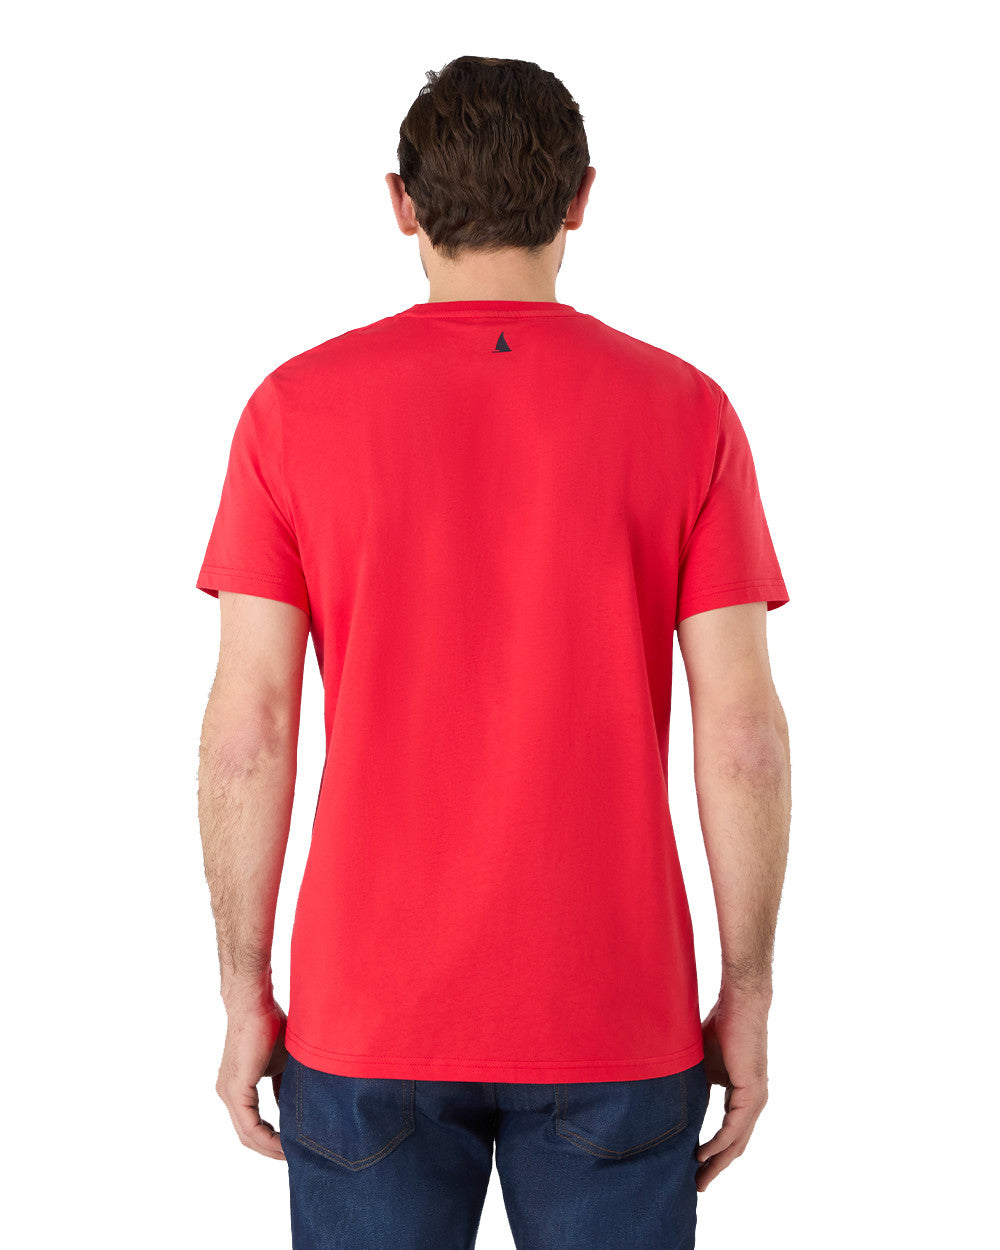 True Red Coloured Musto Mens Nautic Short Sleeve T-Shirt On A White Background 